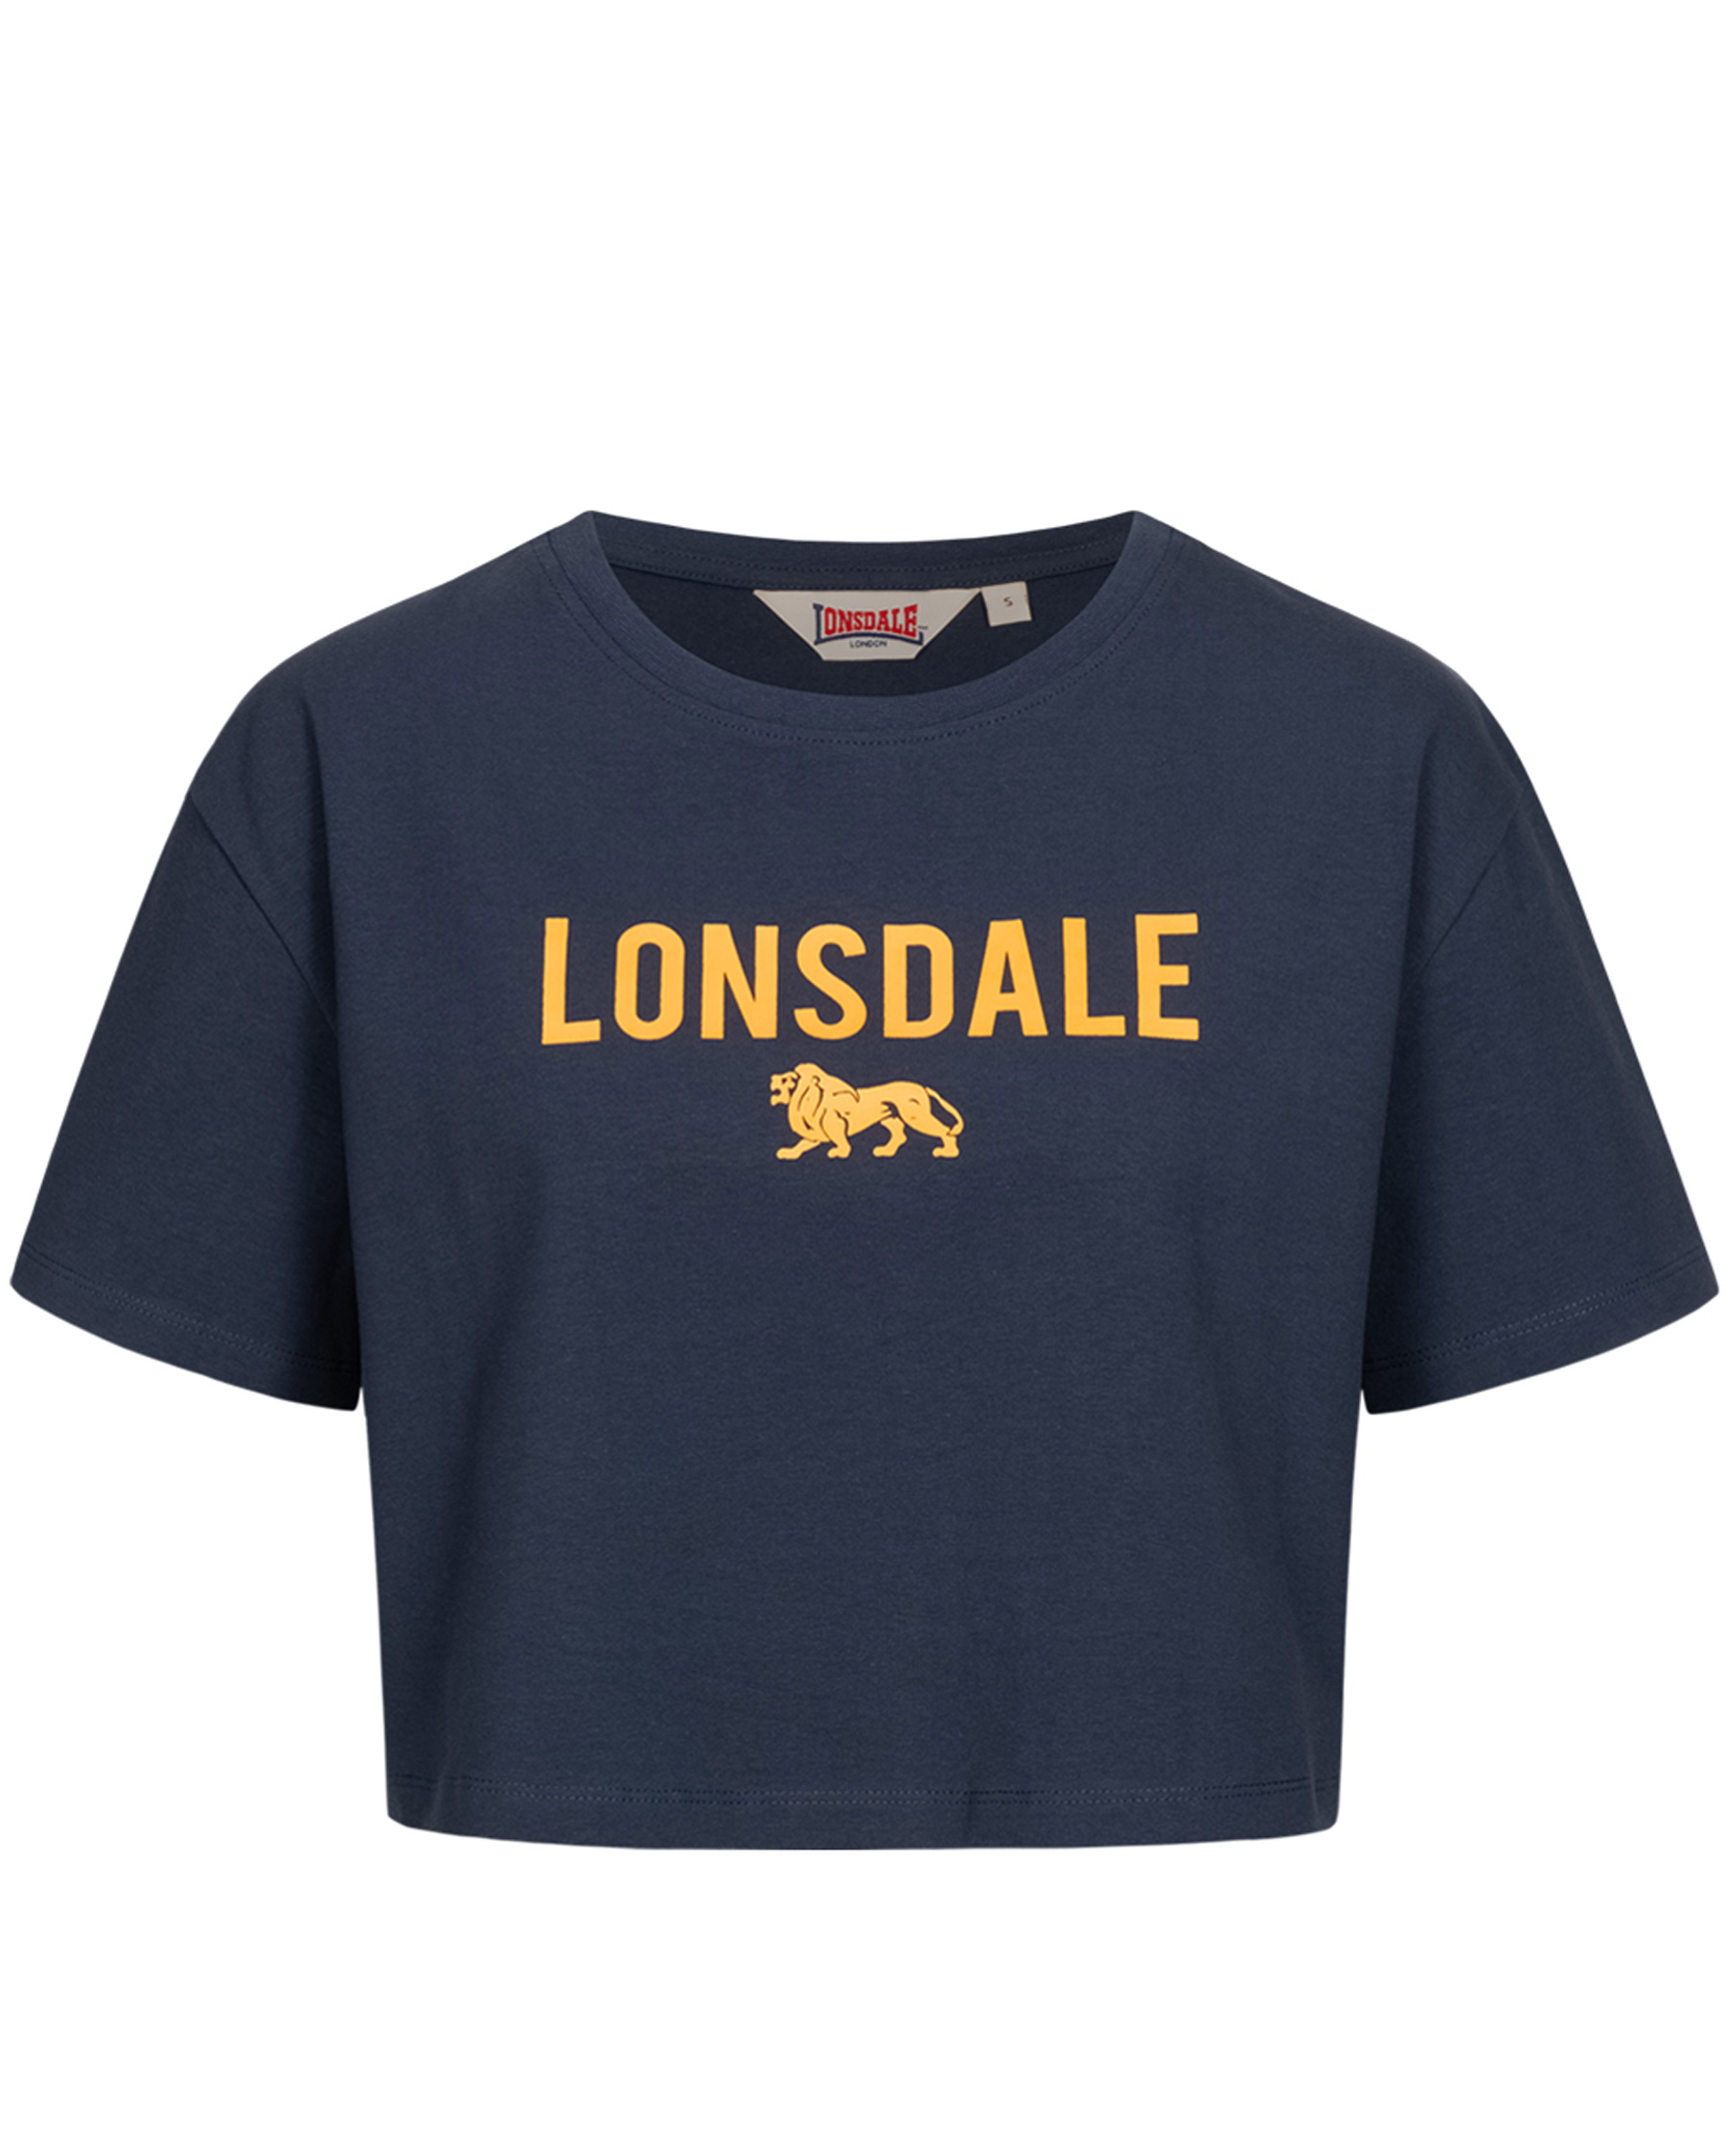 Lonsdale Women's t-shirt cropped